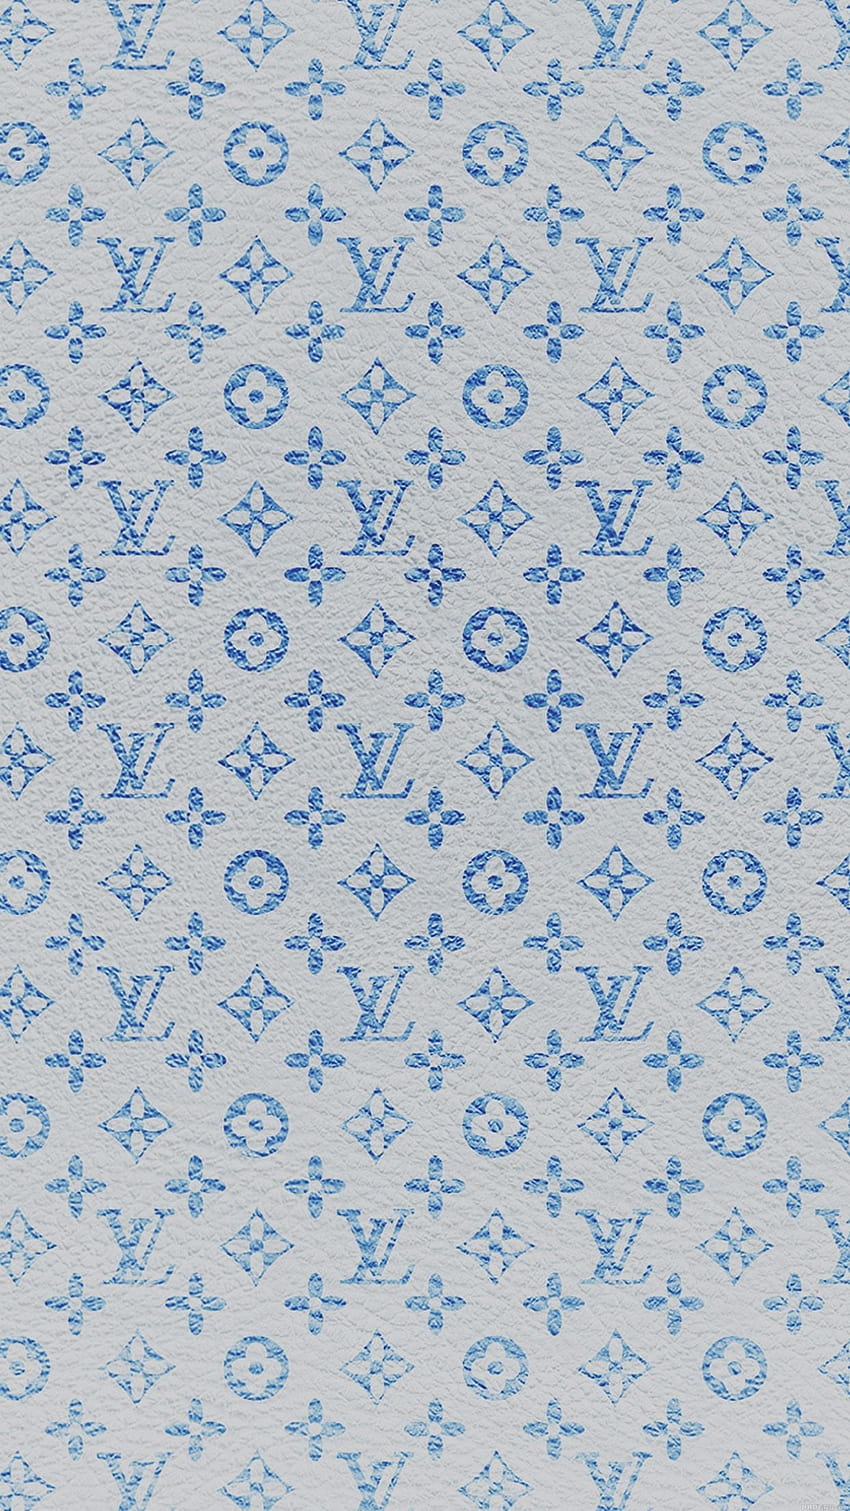 Louis Vuitton Blue Pattern Art Download Free HD Wallpapers for iPhone 6,  6s, 7, 7s, 8, 8s, 10